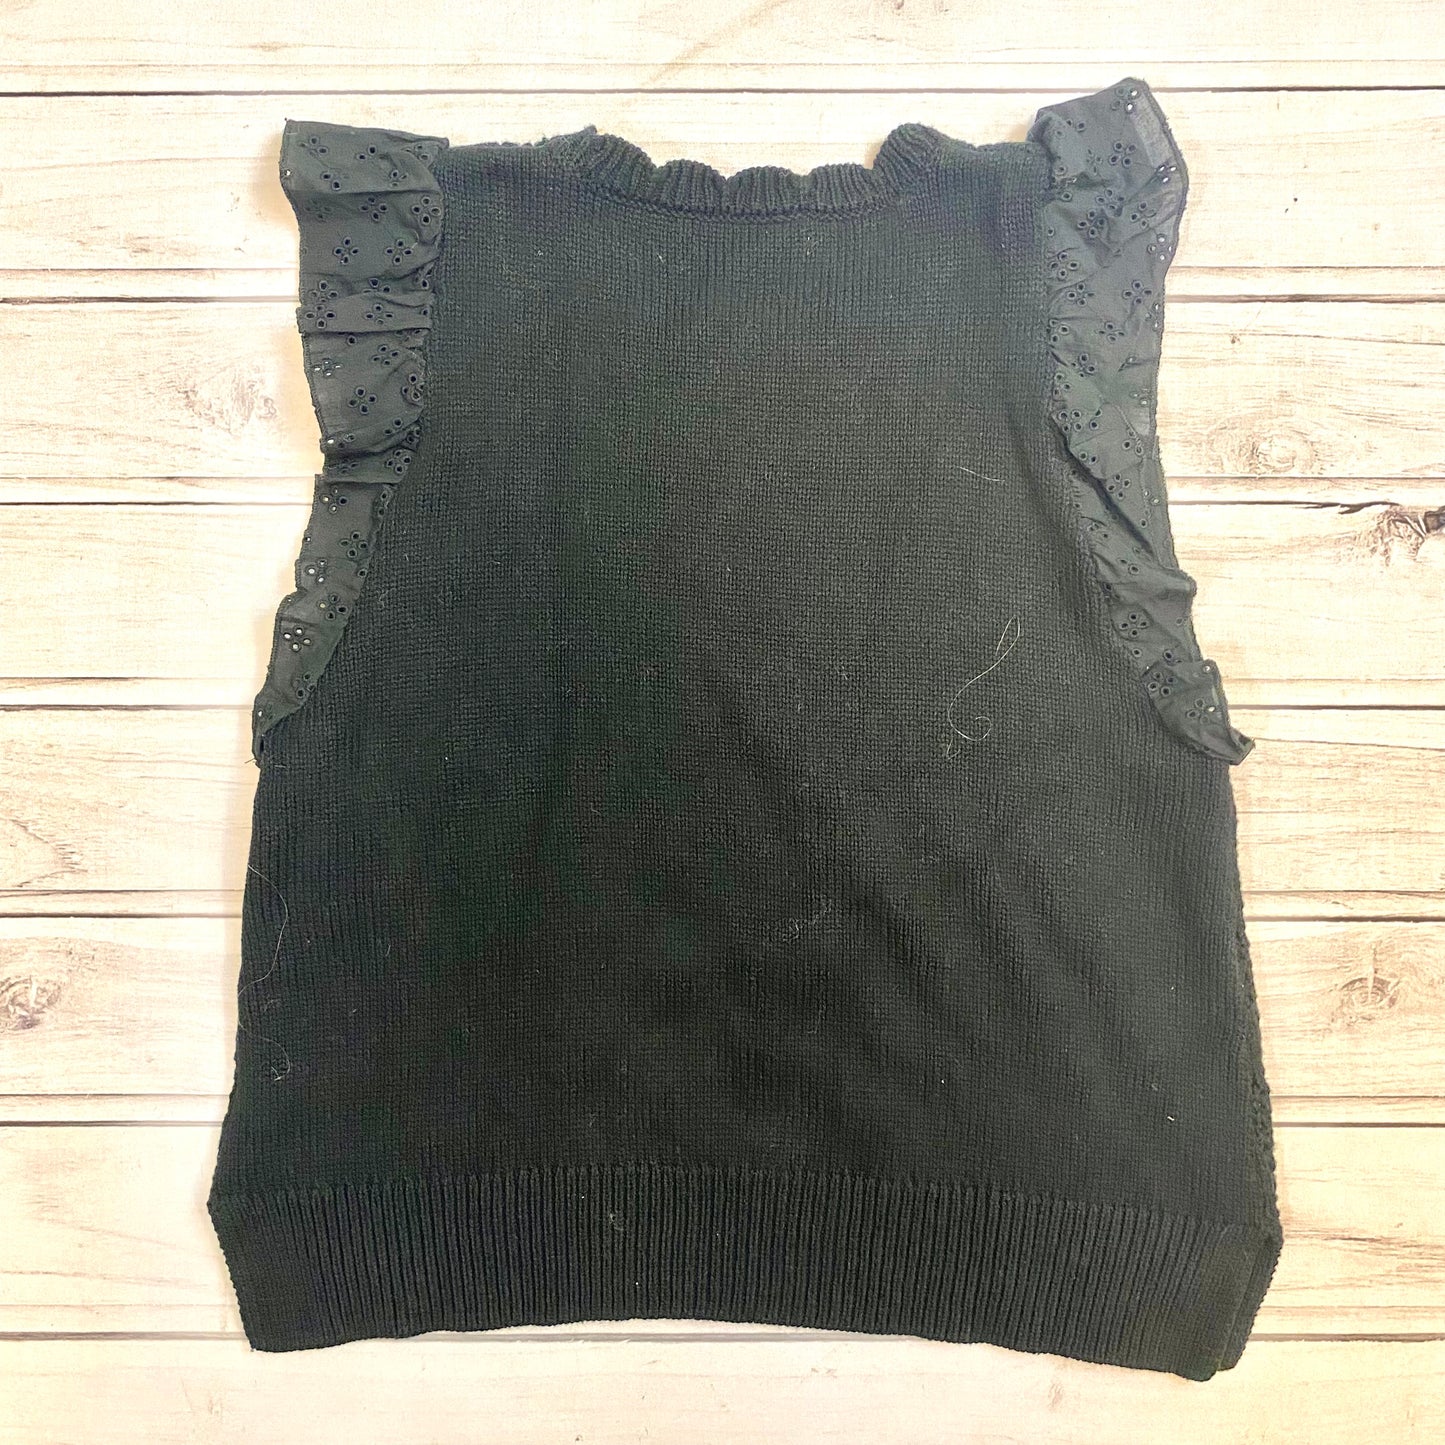 Sweater Designer By Anthropologie  Size: Xs